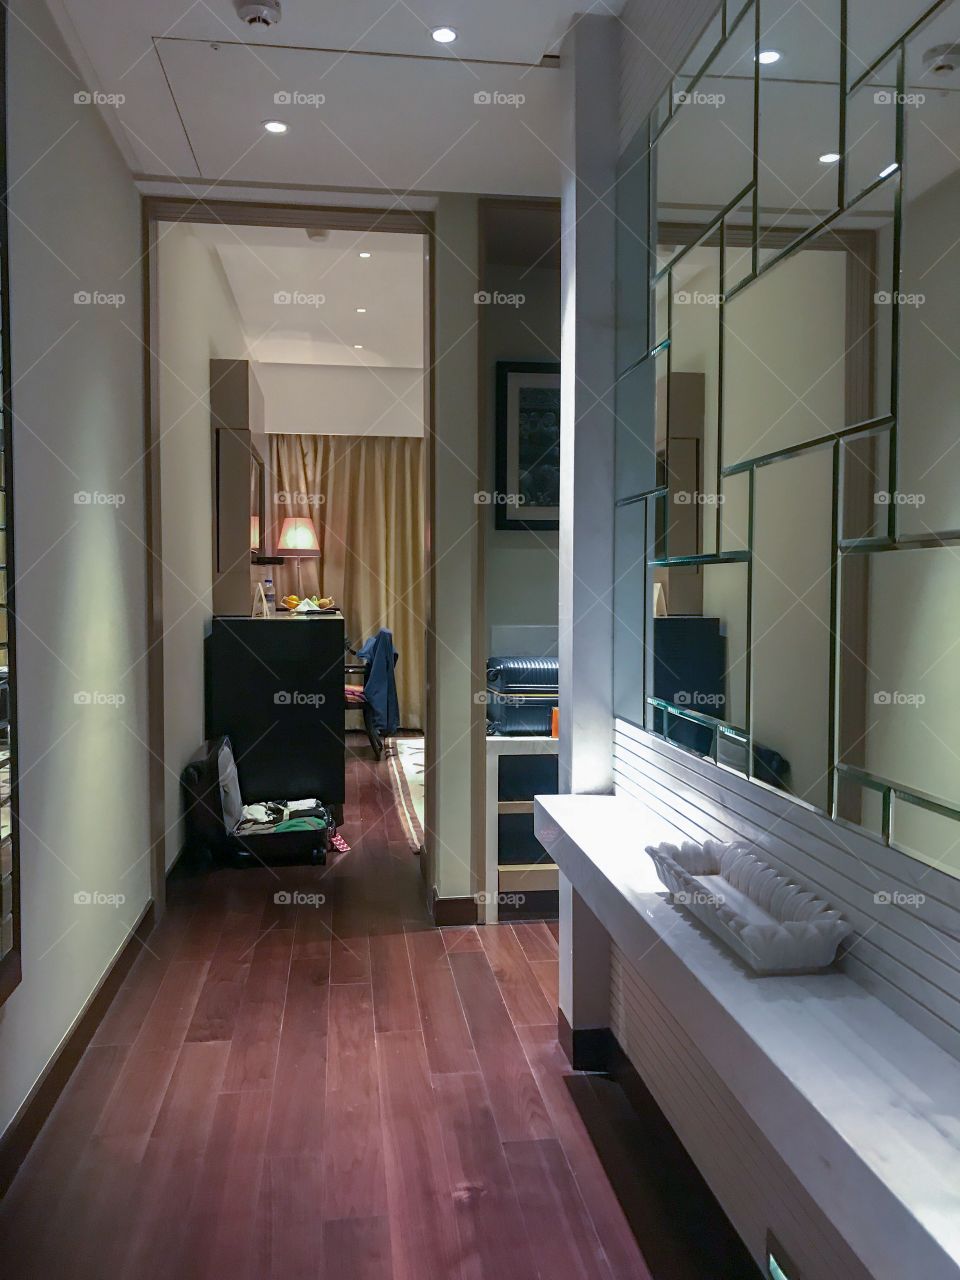 Hotel rooms with glass, mirrors & various lights ...